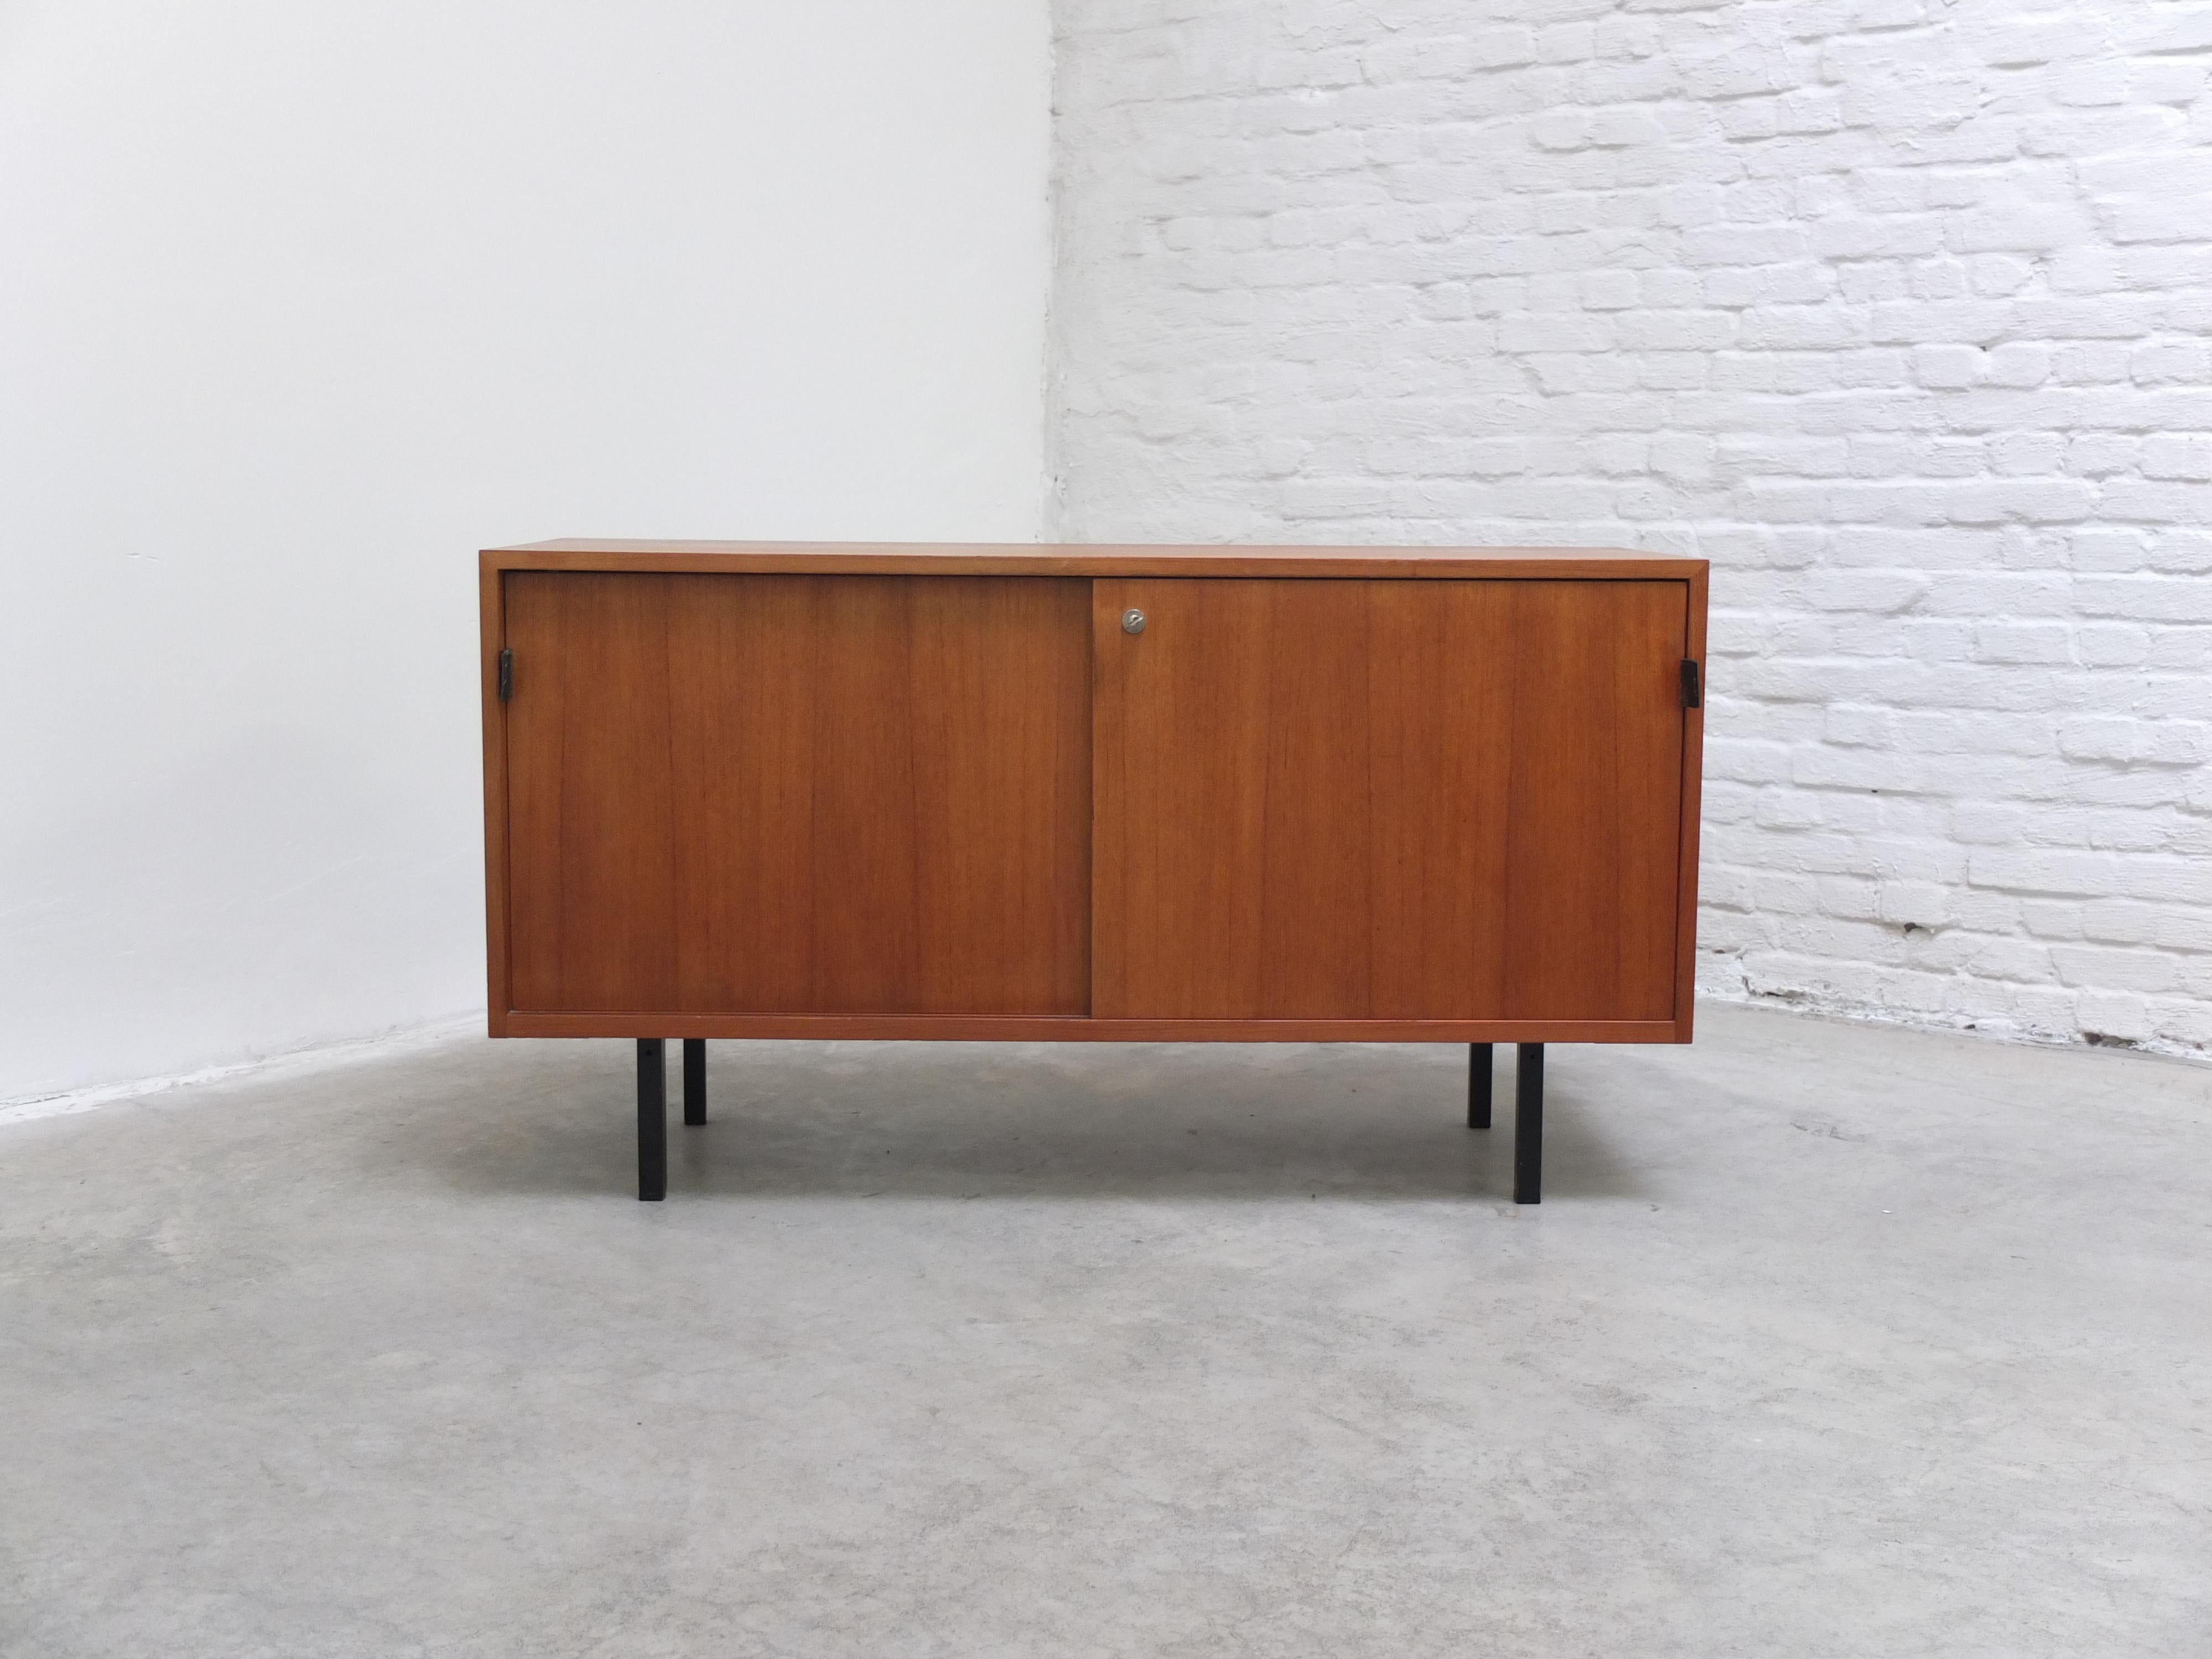 Small modernist sideboard designed by Florence Knoll Basset during the 1950s. This model is made of teak wood with leather handles and black metal square legs. Florence Knoll is known for a wide range of high-end minimalistic sideboards and these